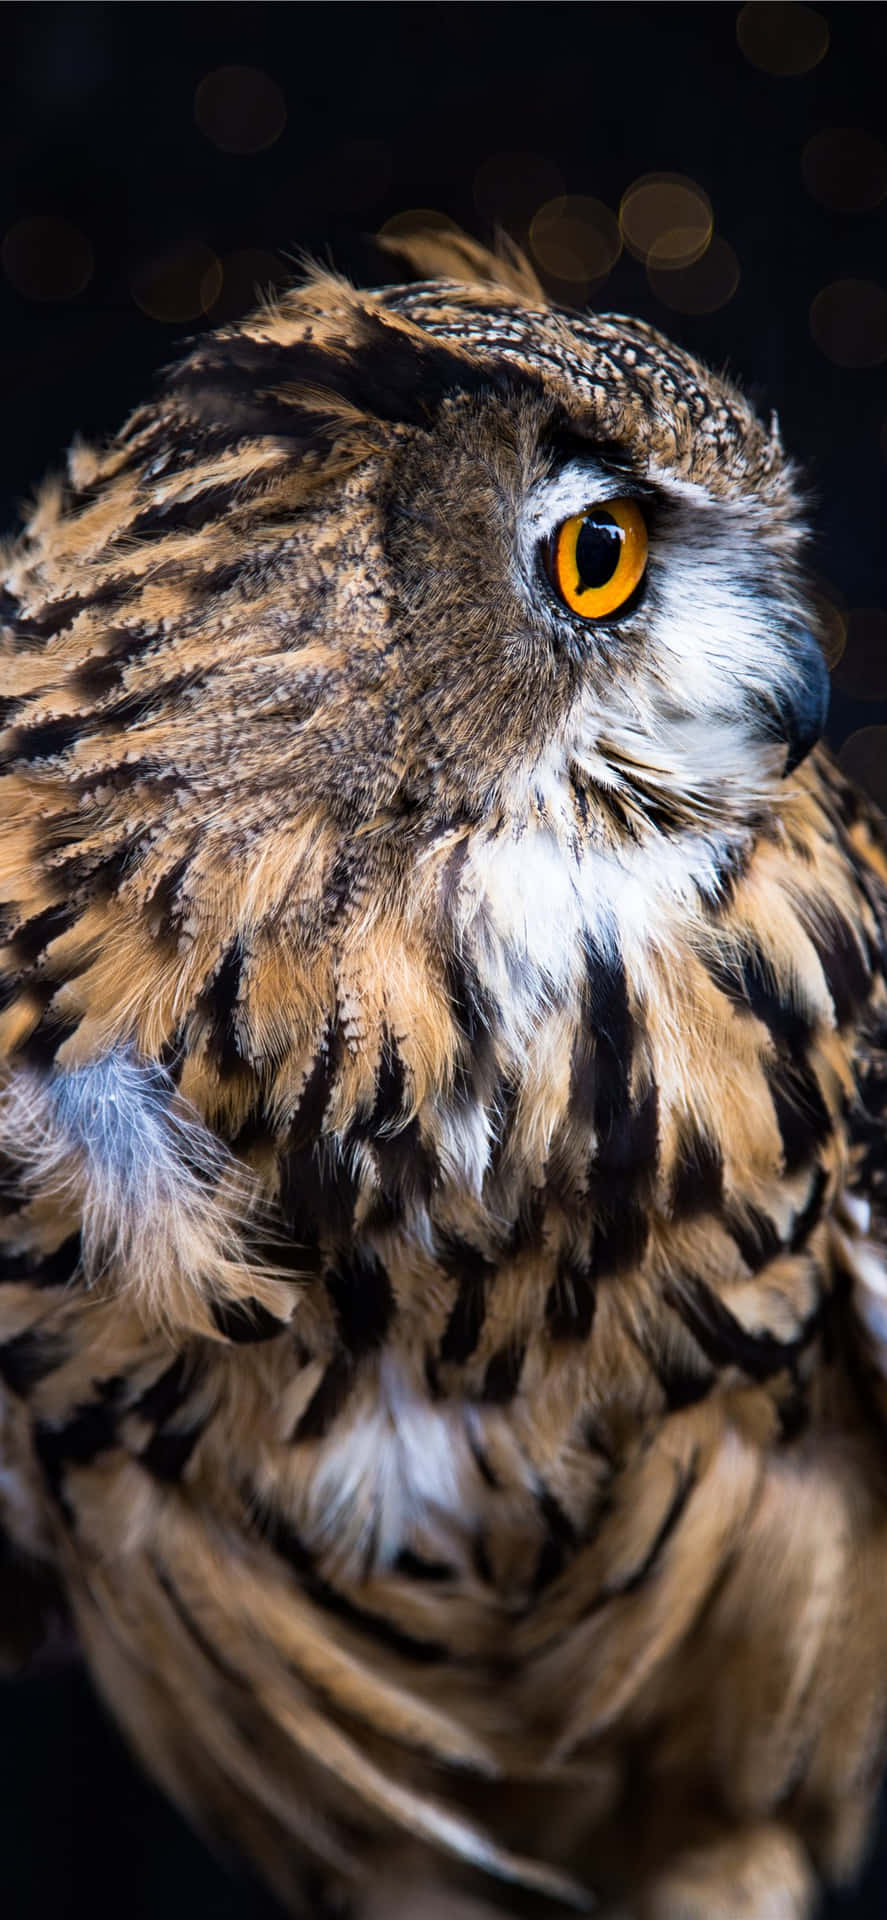 A Owl With A Yellow Eye Background